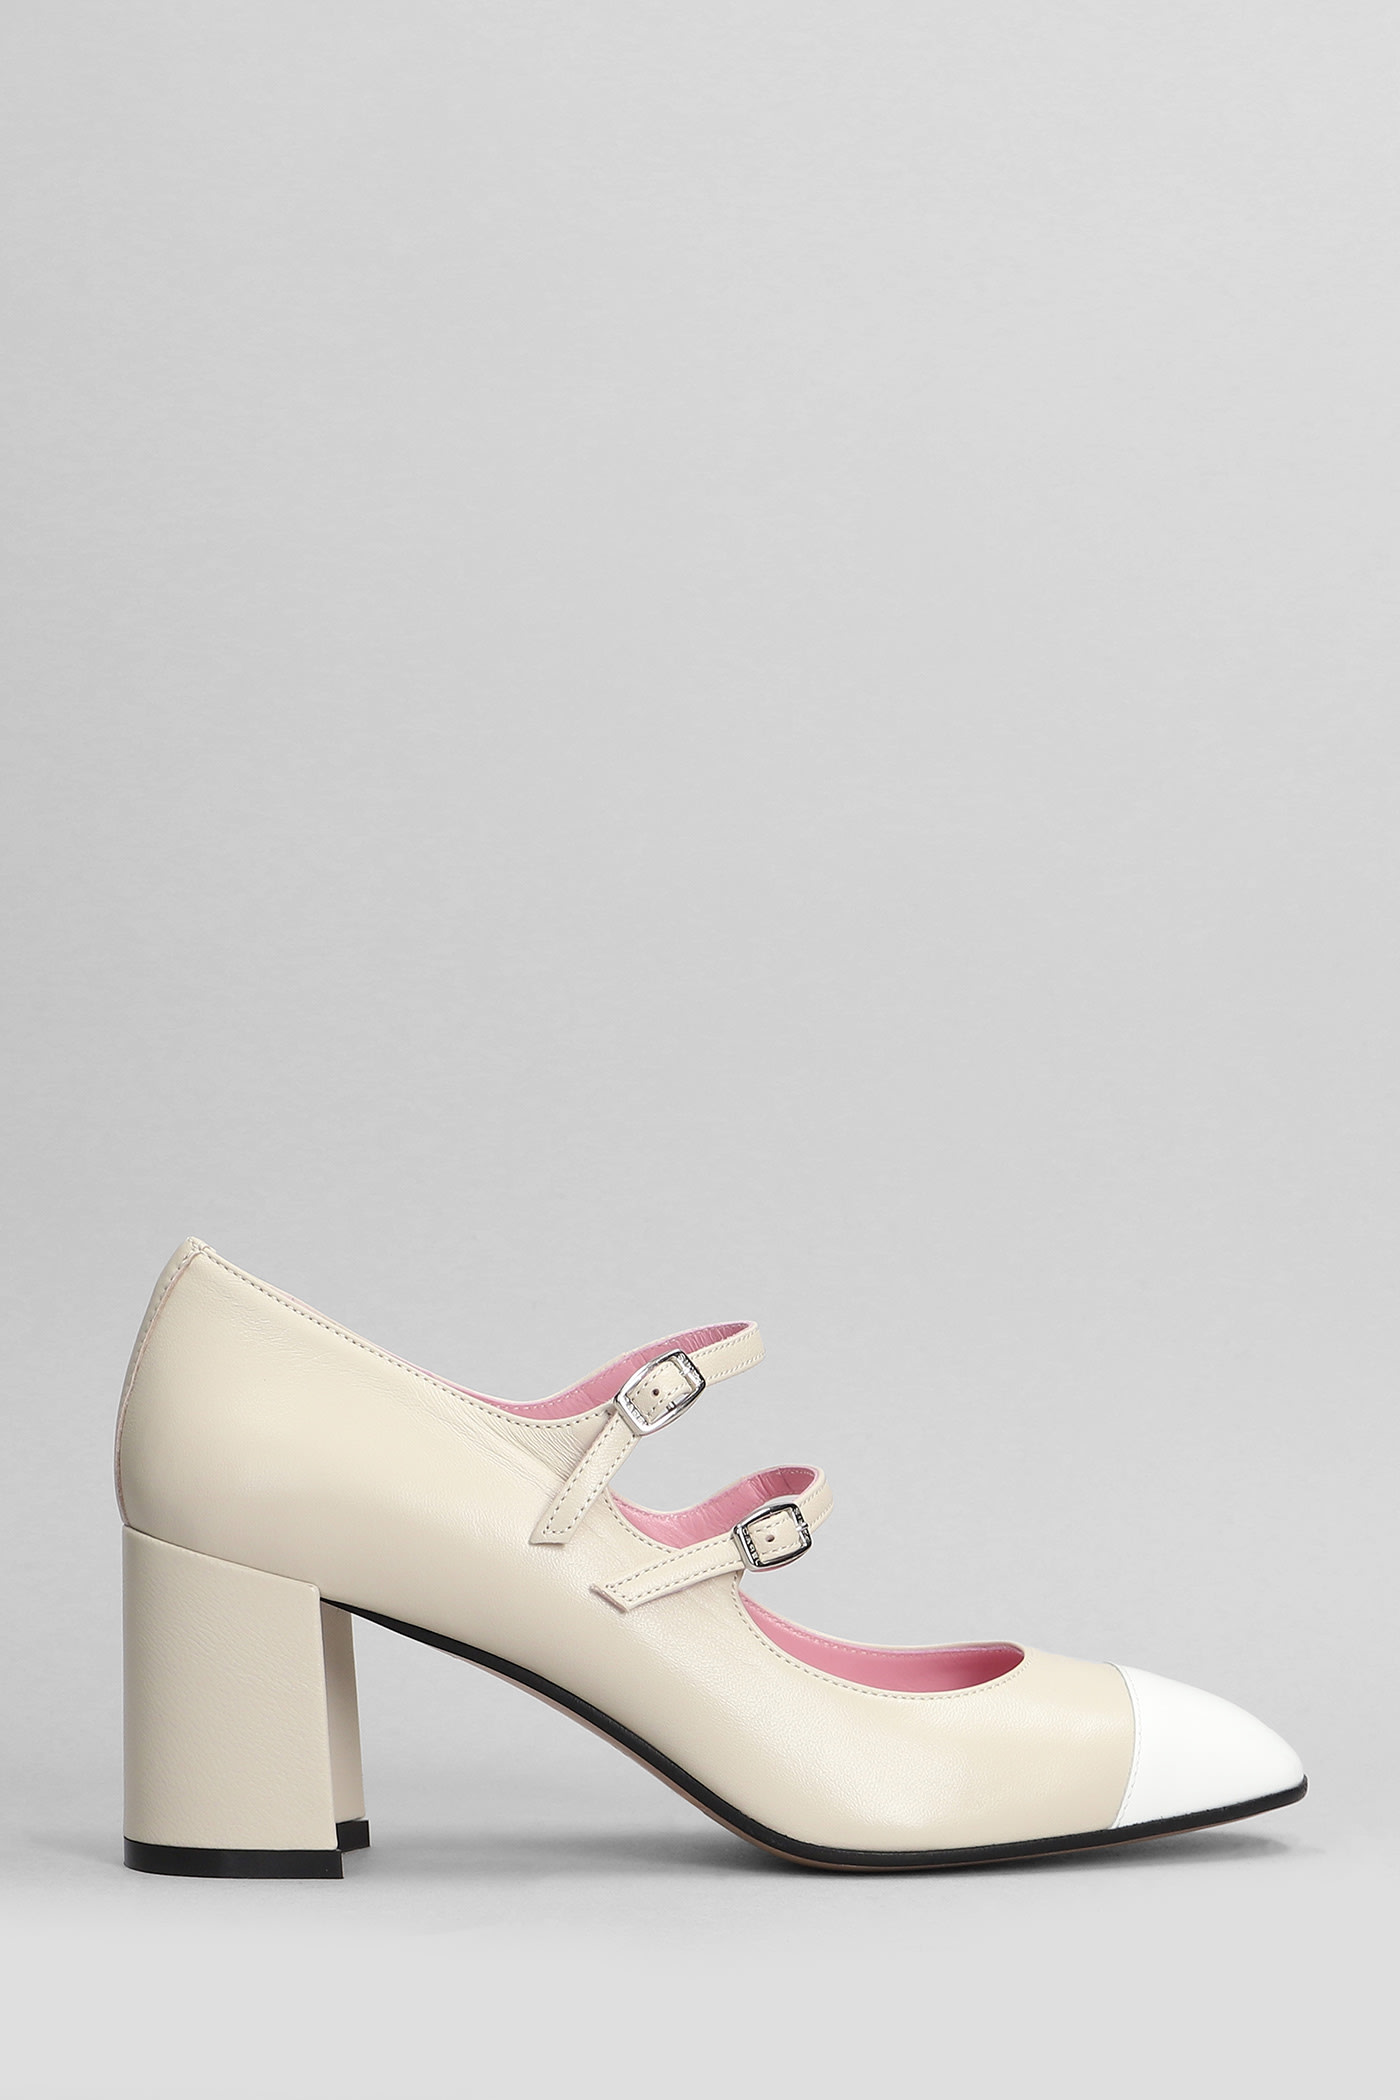 Shop Carel Cherry Pumps In Beige Leather